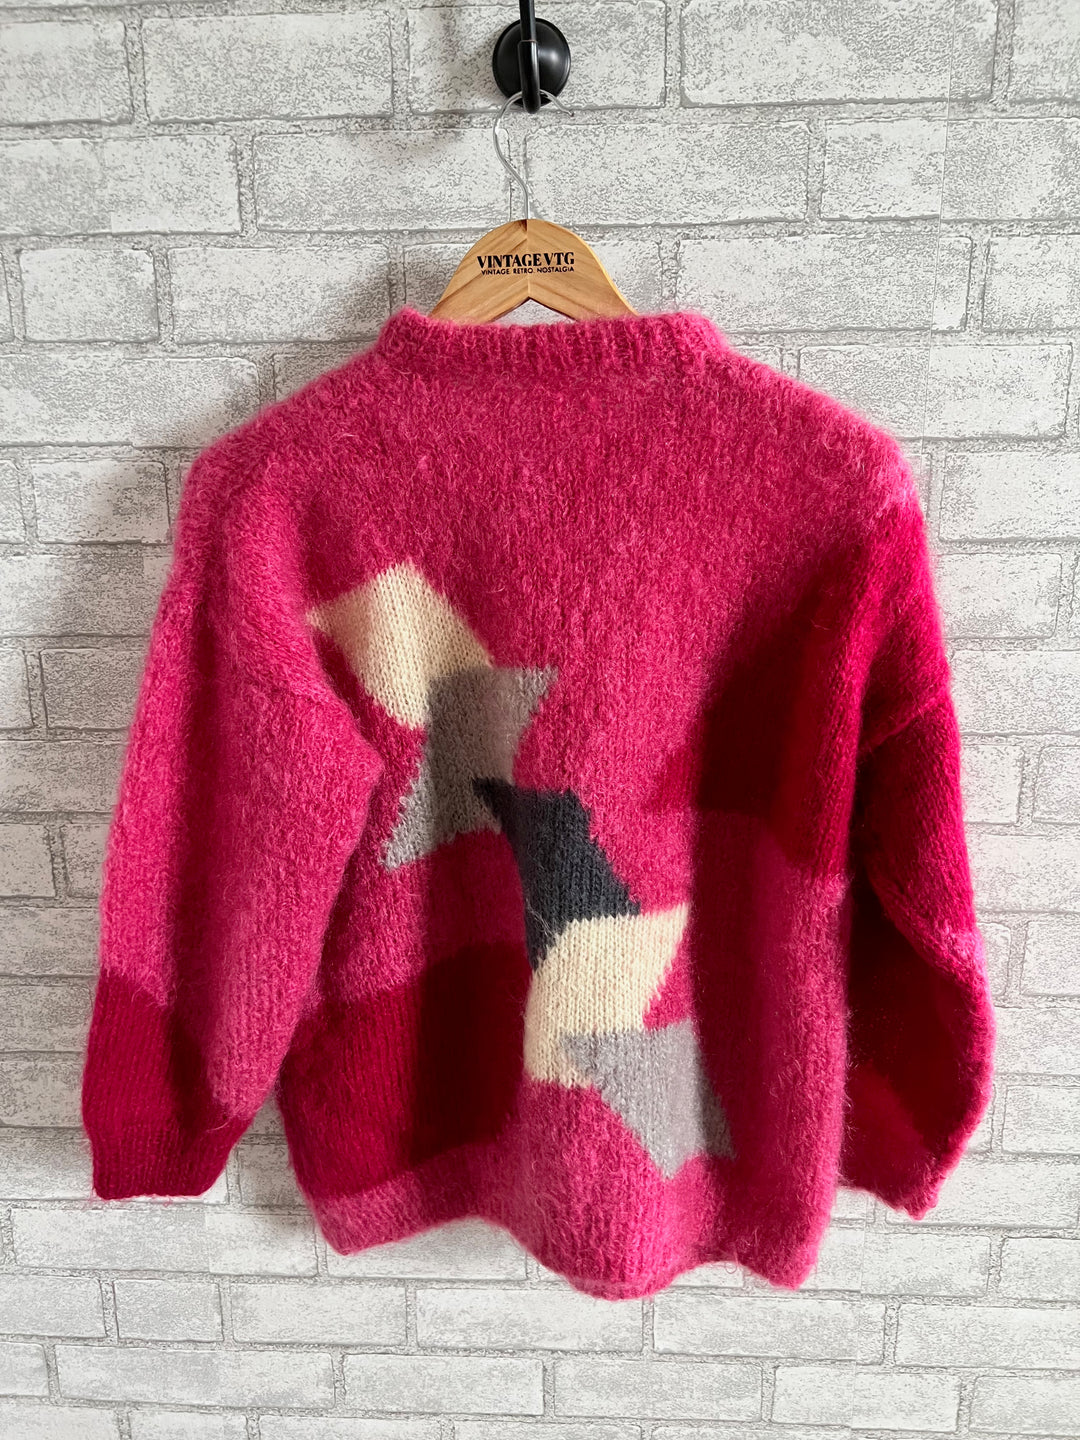 Vintage Red and Pink Sweater.